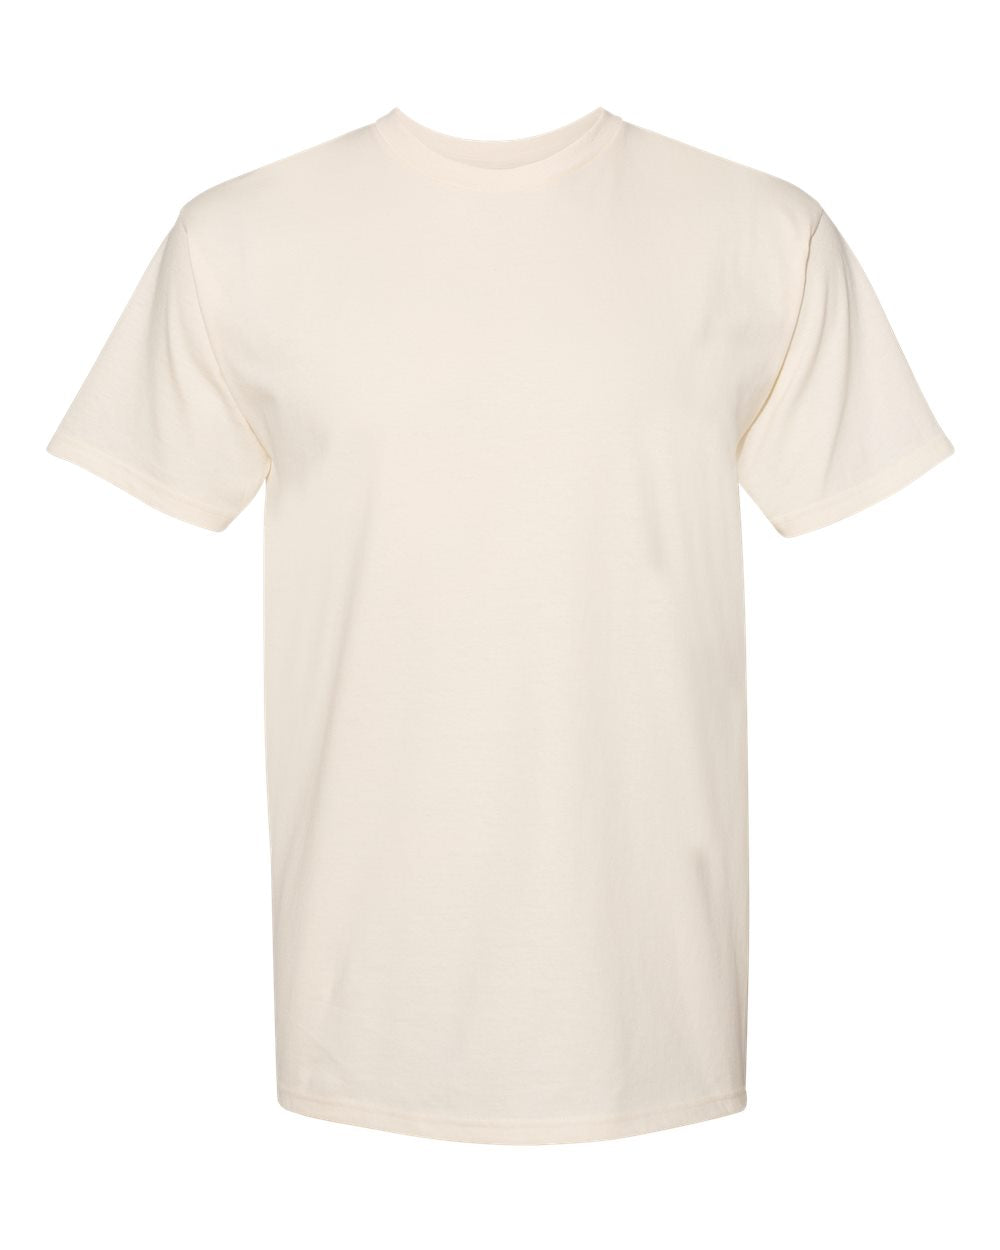 American Apparel Midweight Cotton Unisex Tee 1701 #color_Cream